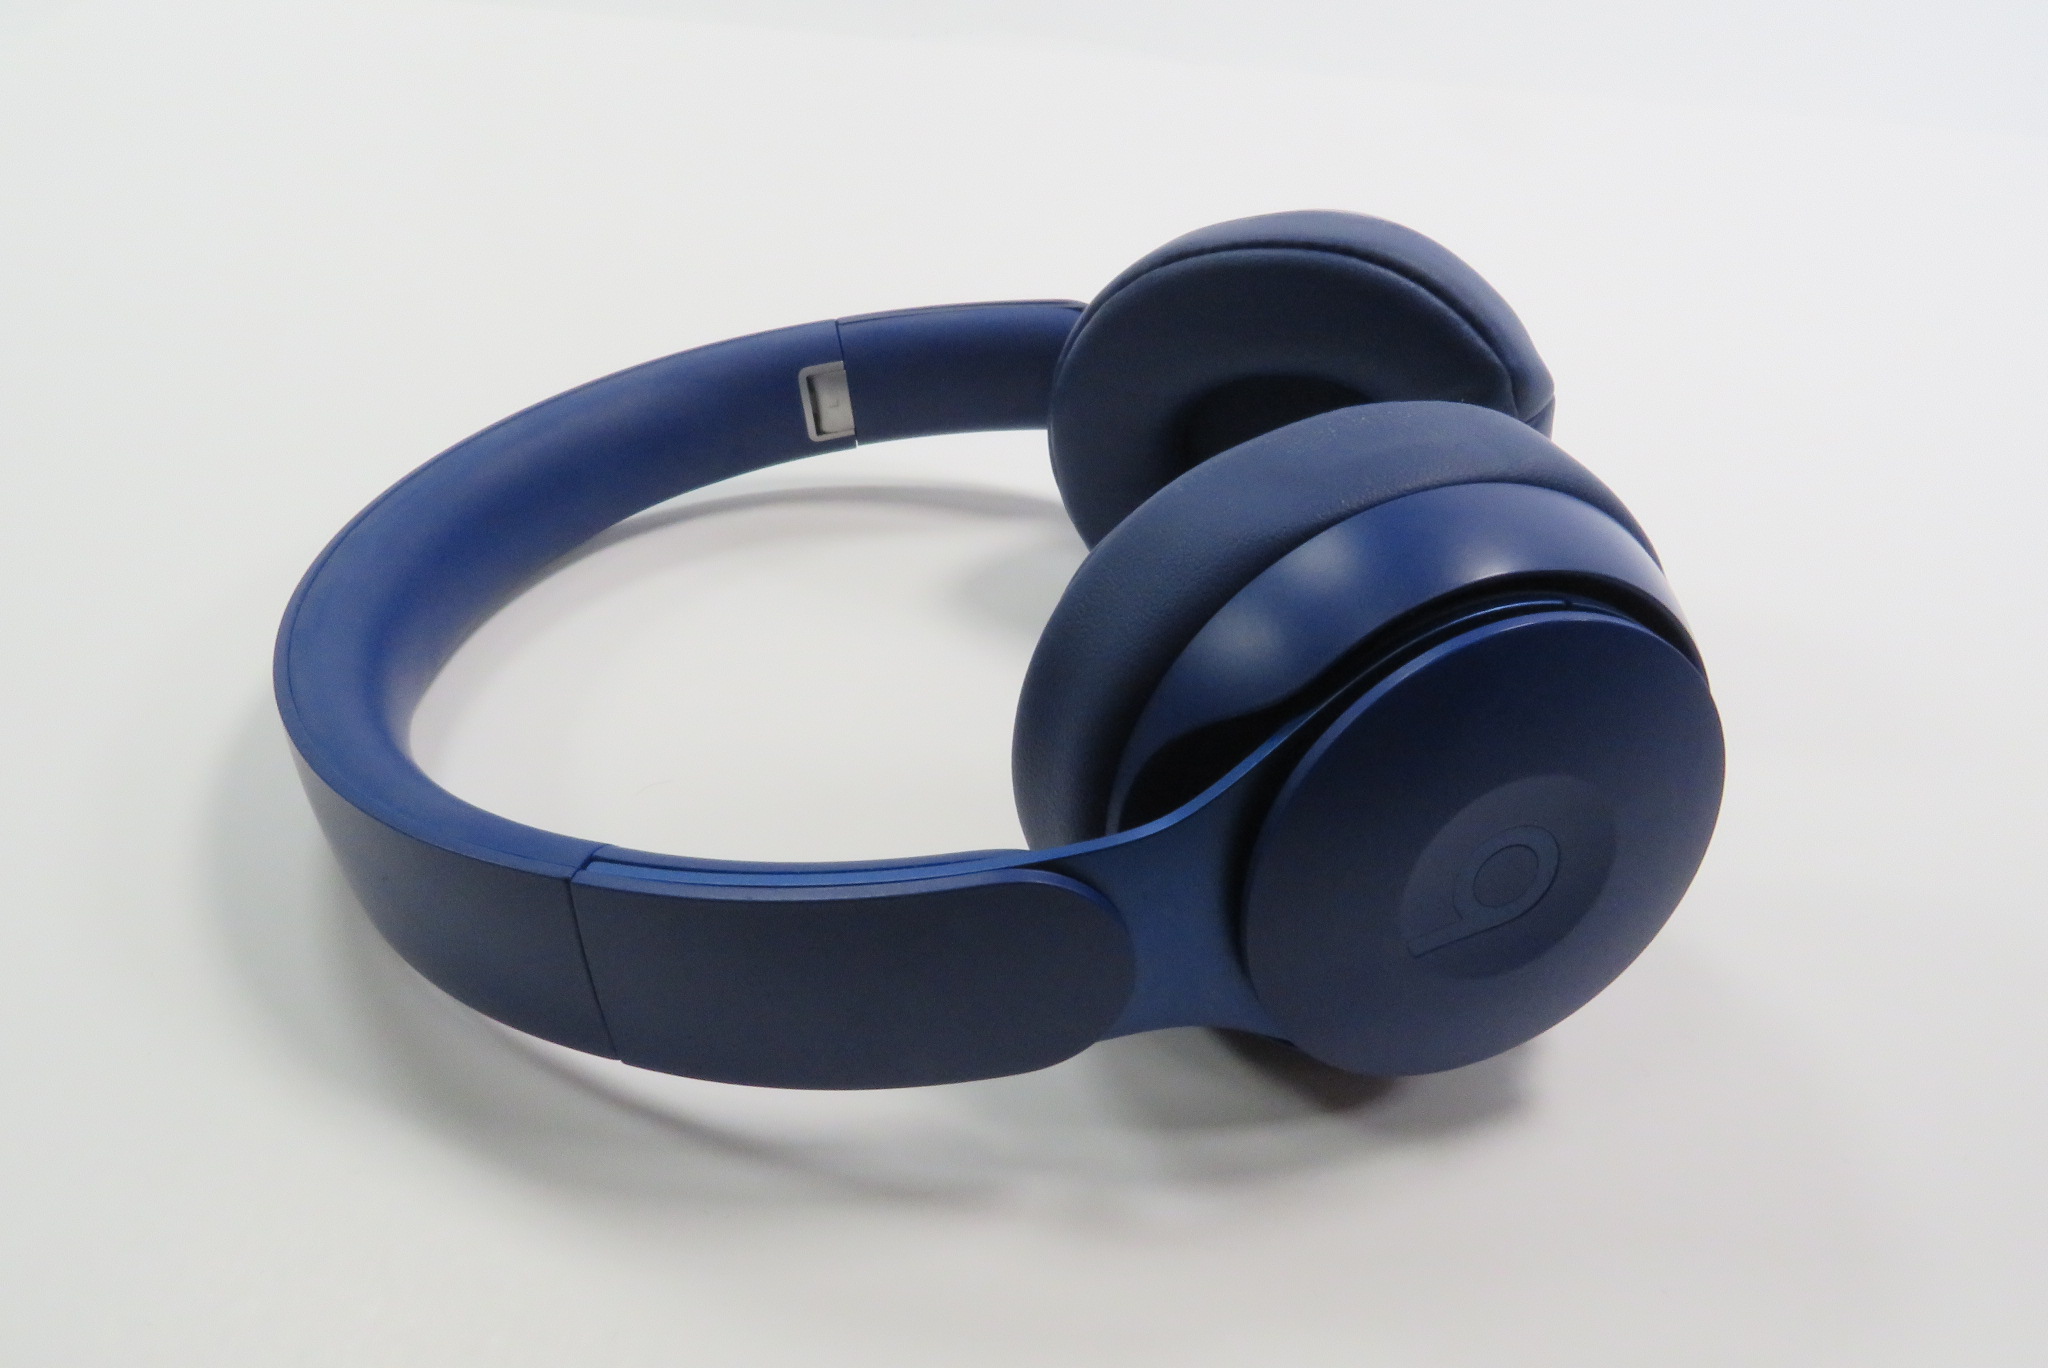 Pawn Beats Headphones - Get Fast Cash On 90 Day Loan